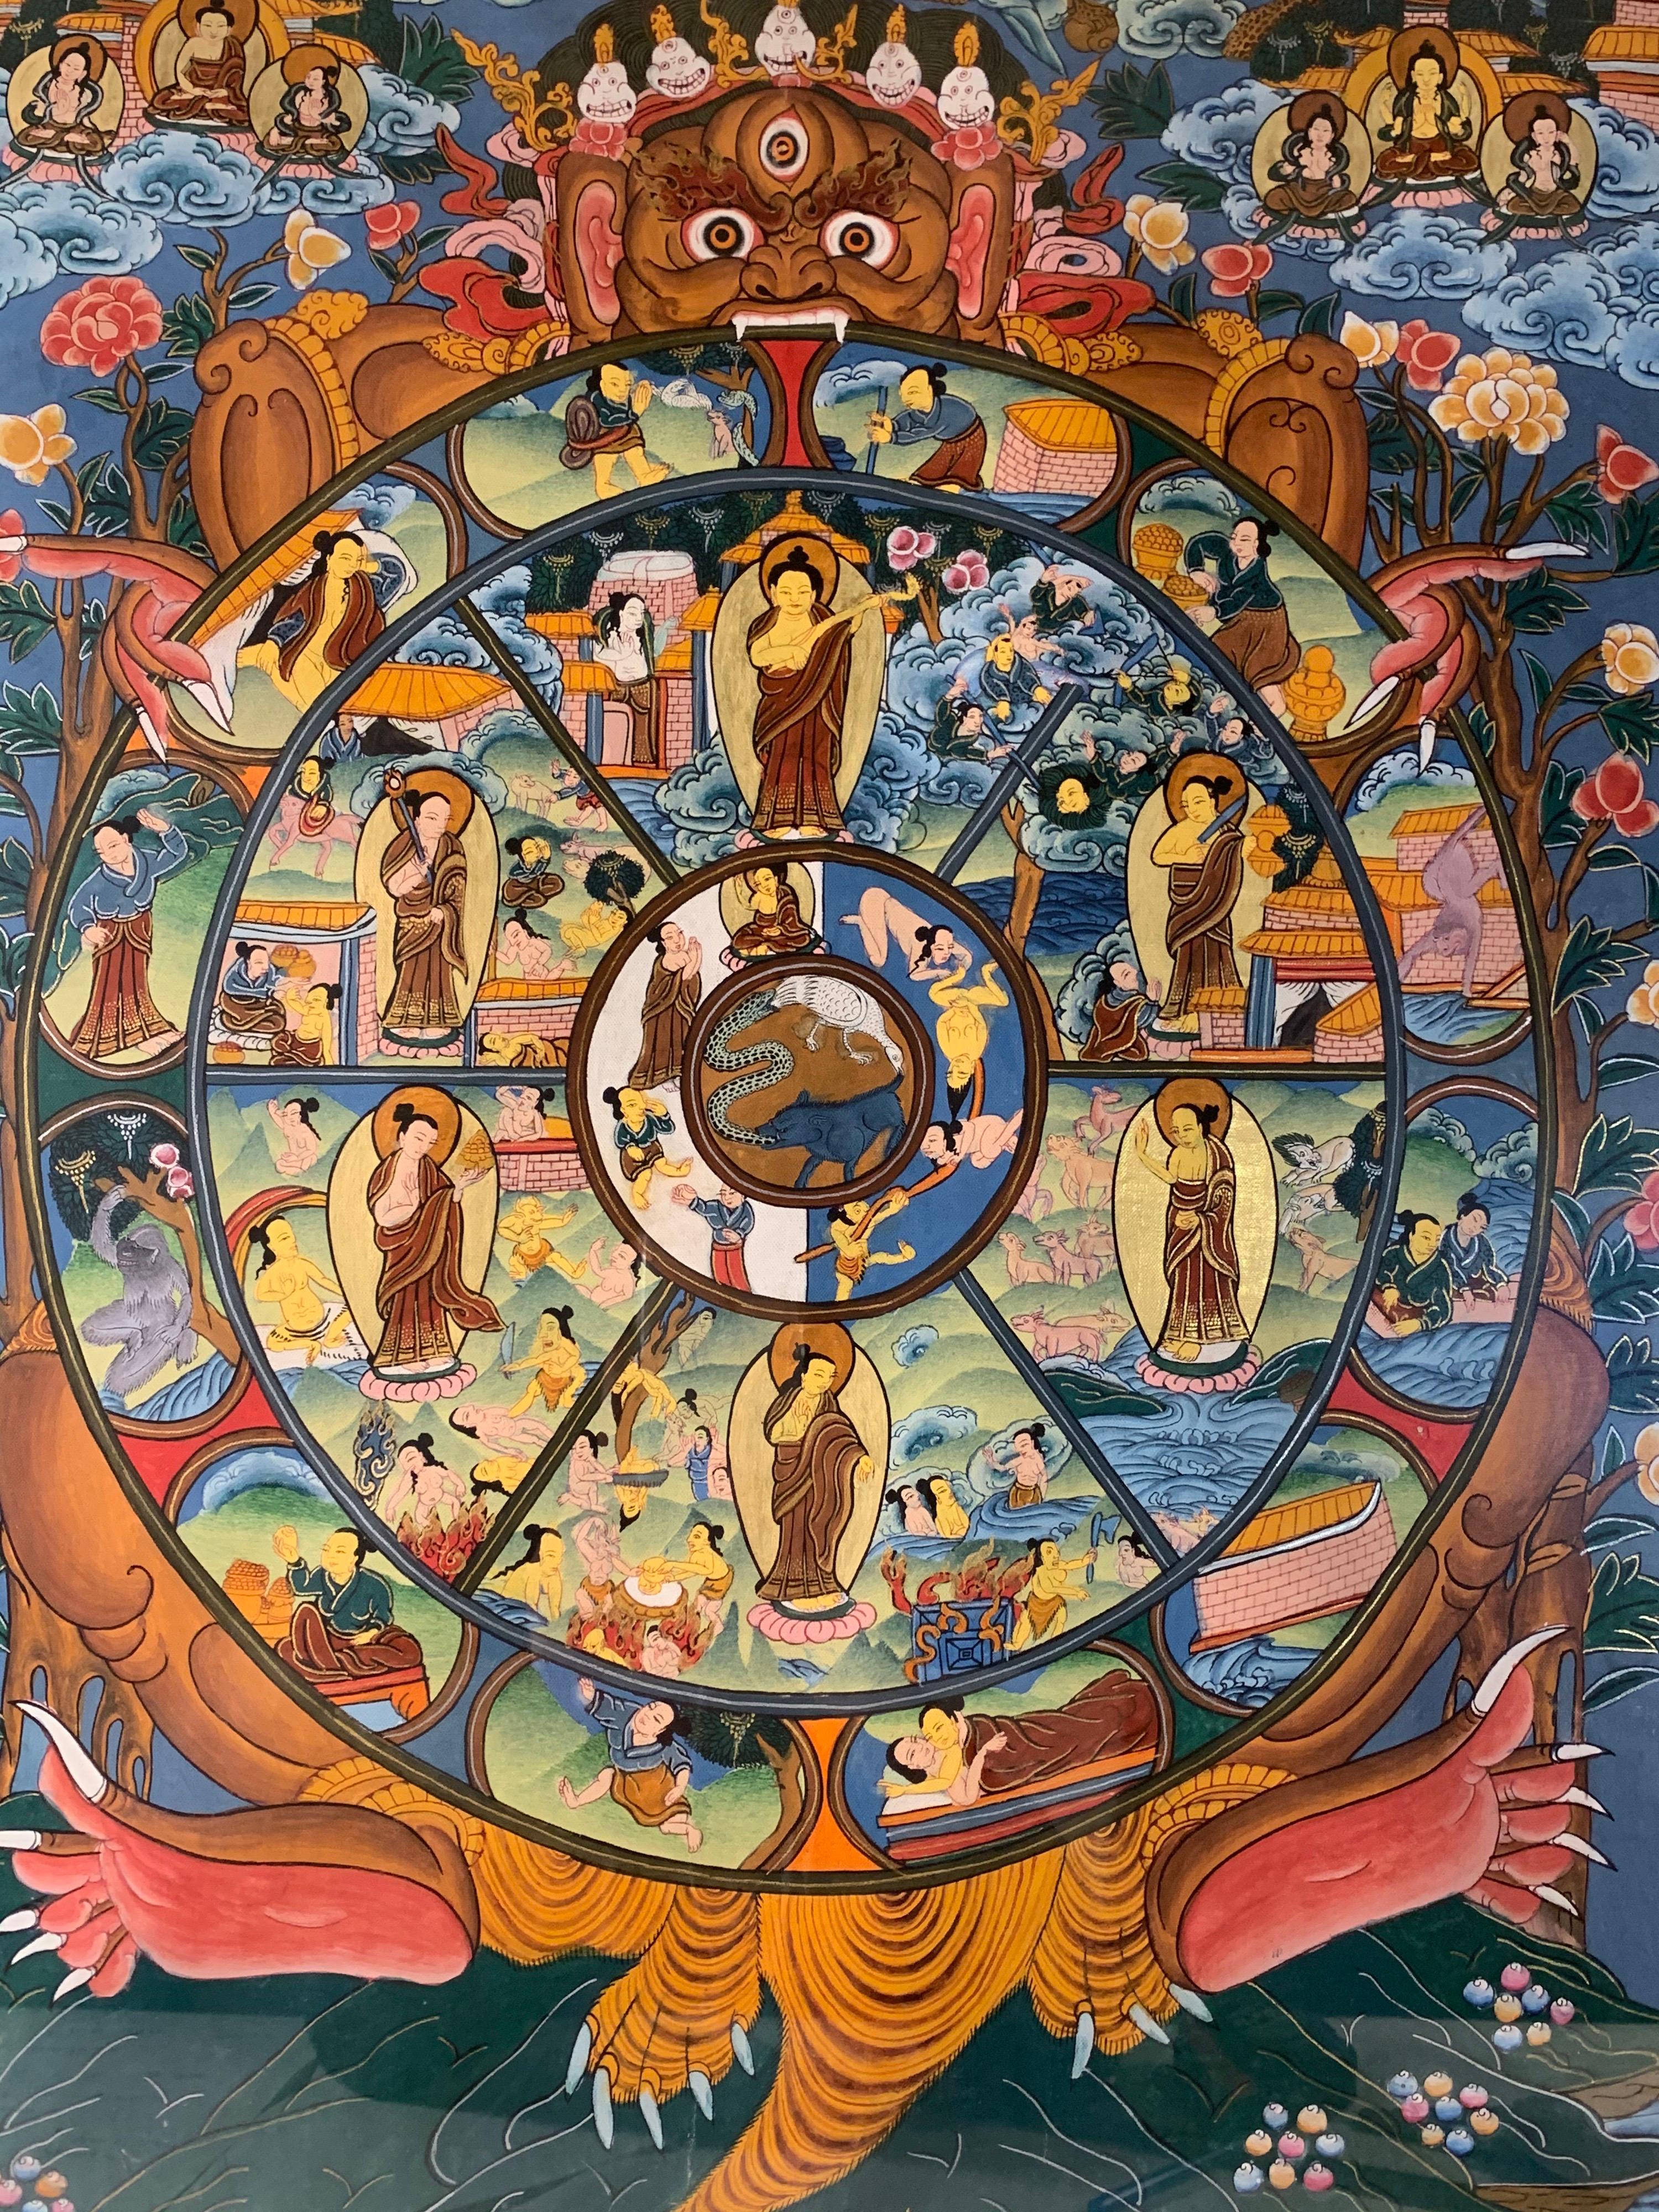 Framed Hand Painted Original Wheel of Life Thangka on Canvas with 24K Gold For Sale 1